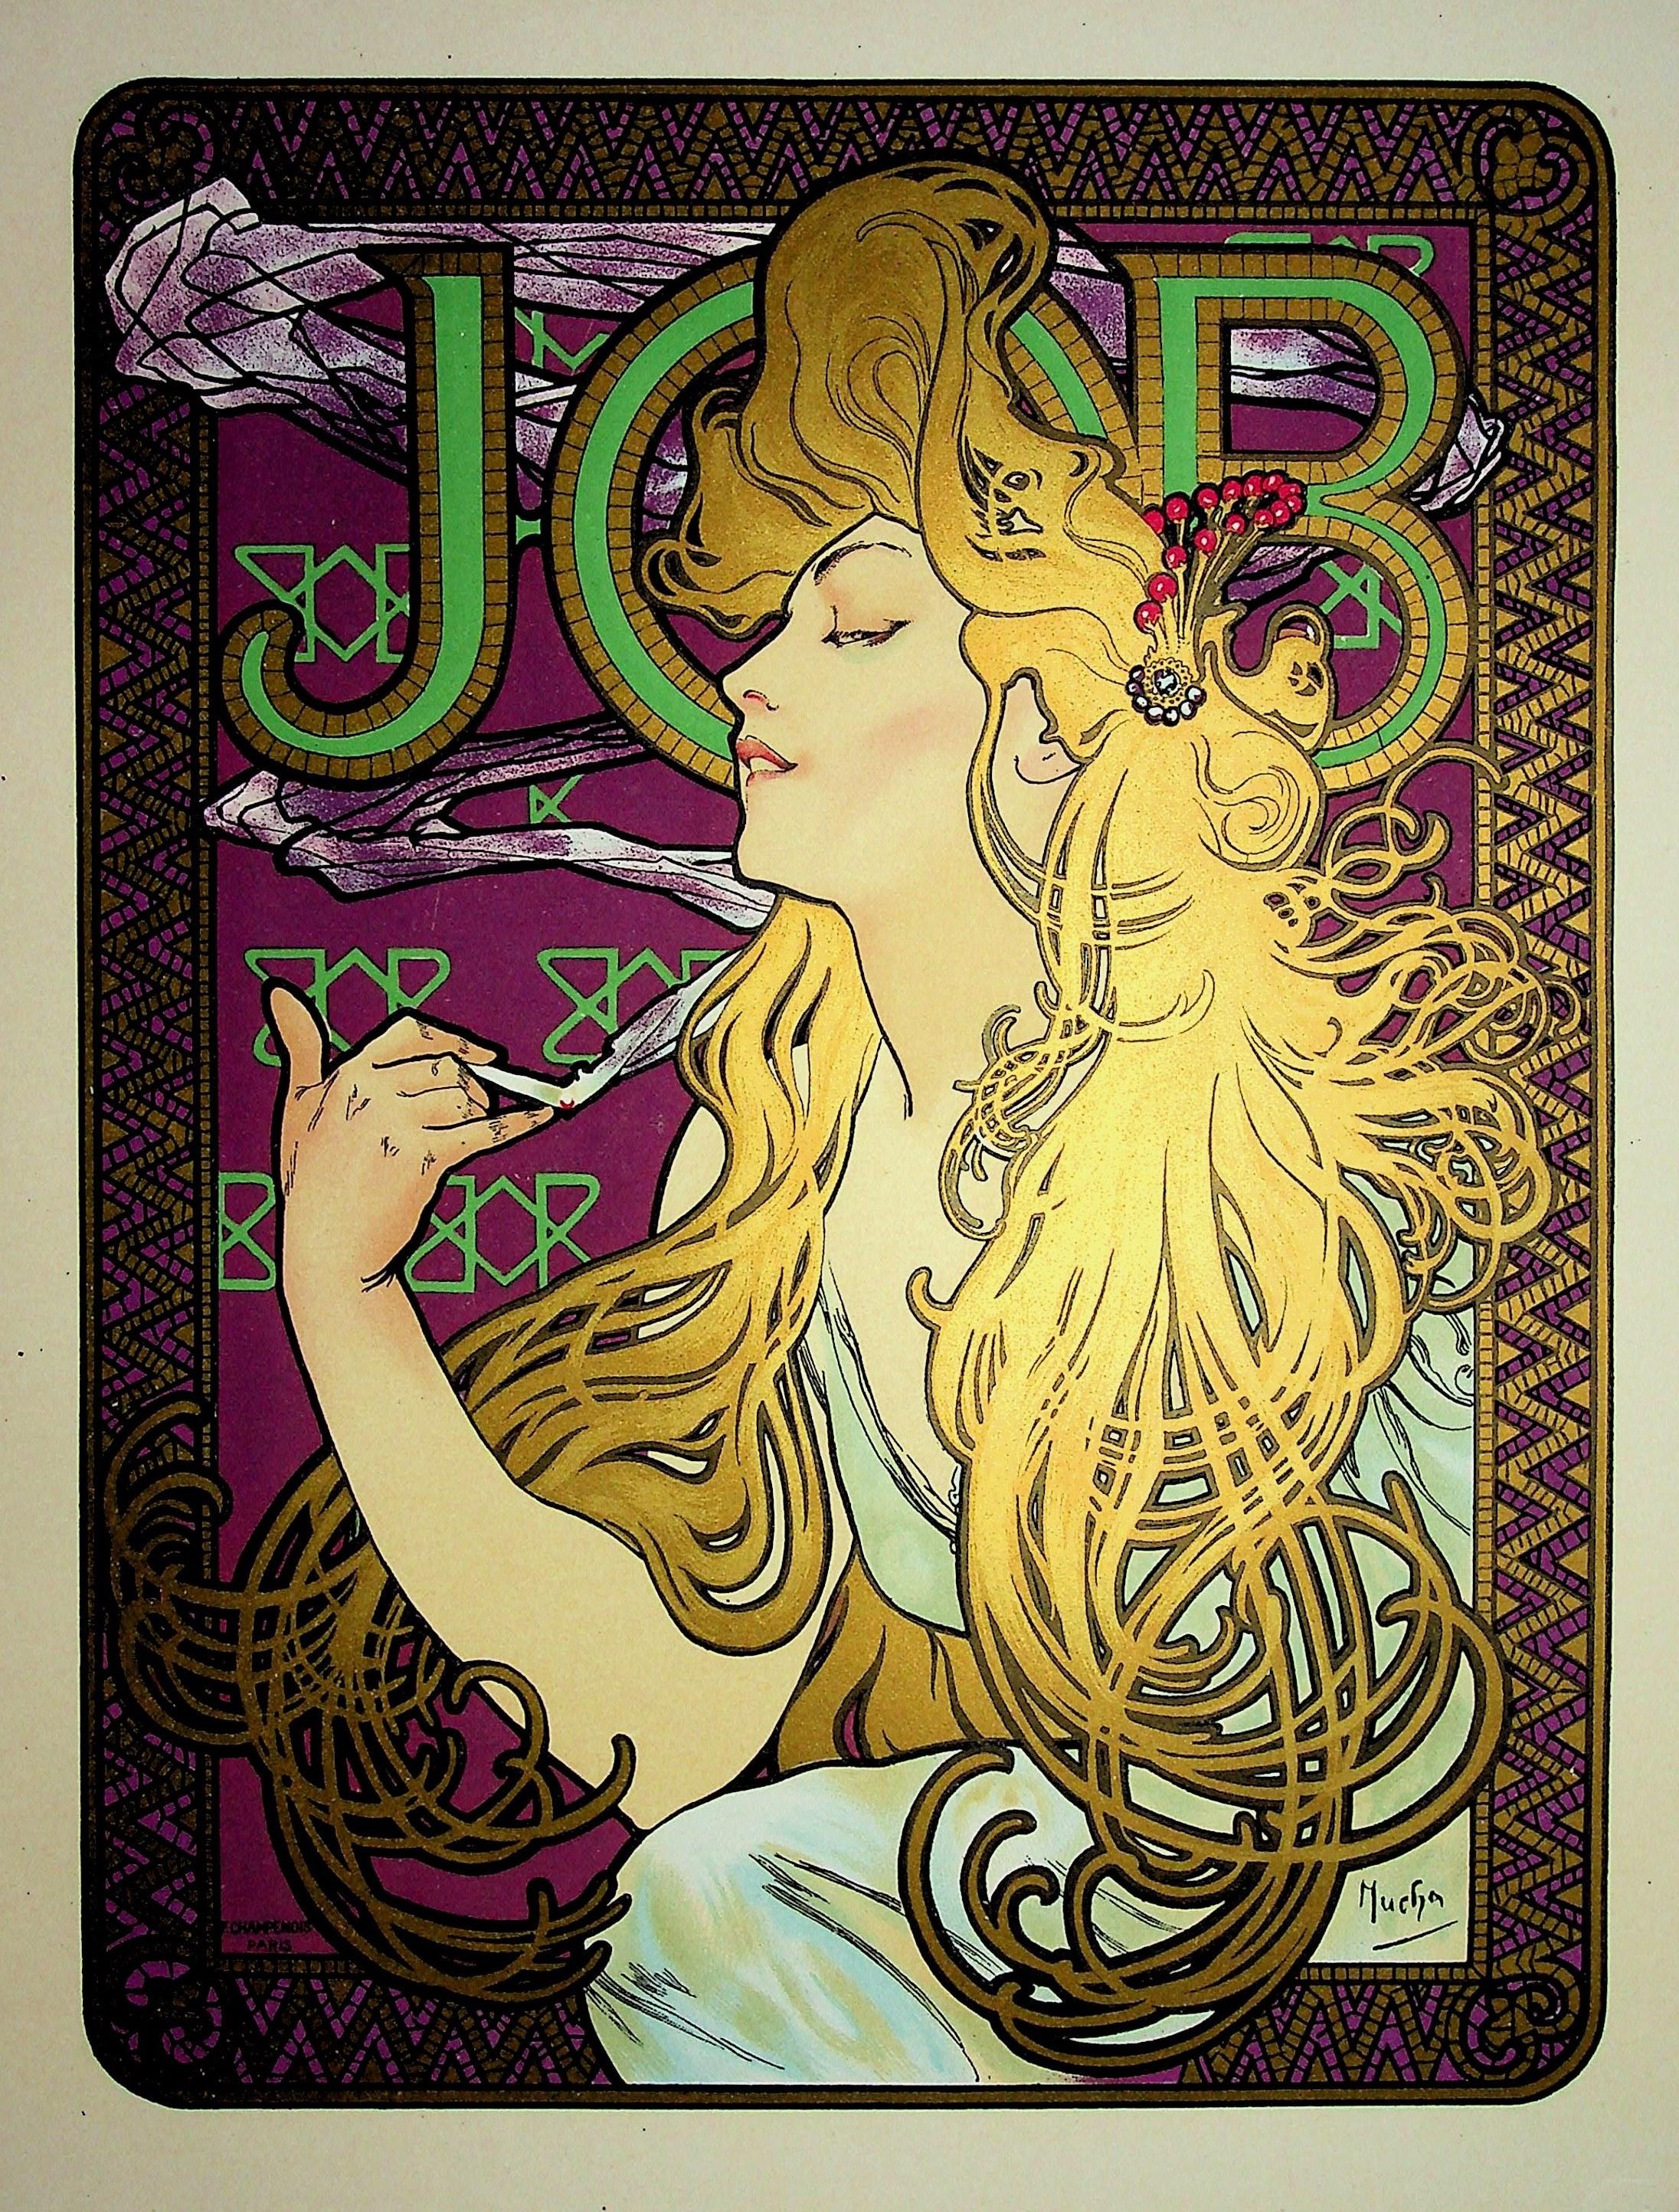 Woman Smoking a Cigarette - Lithograph (from 